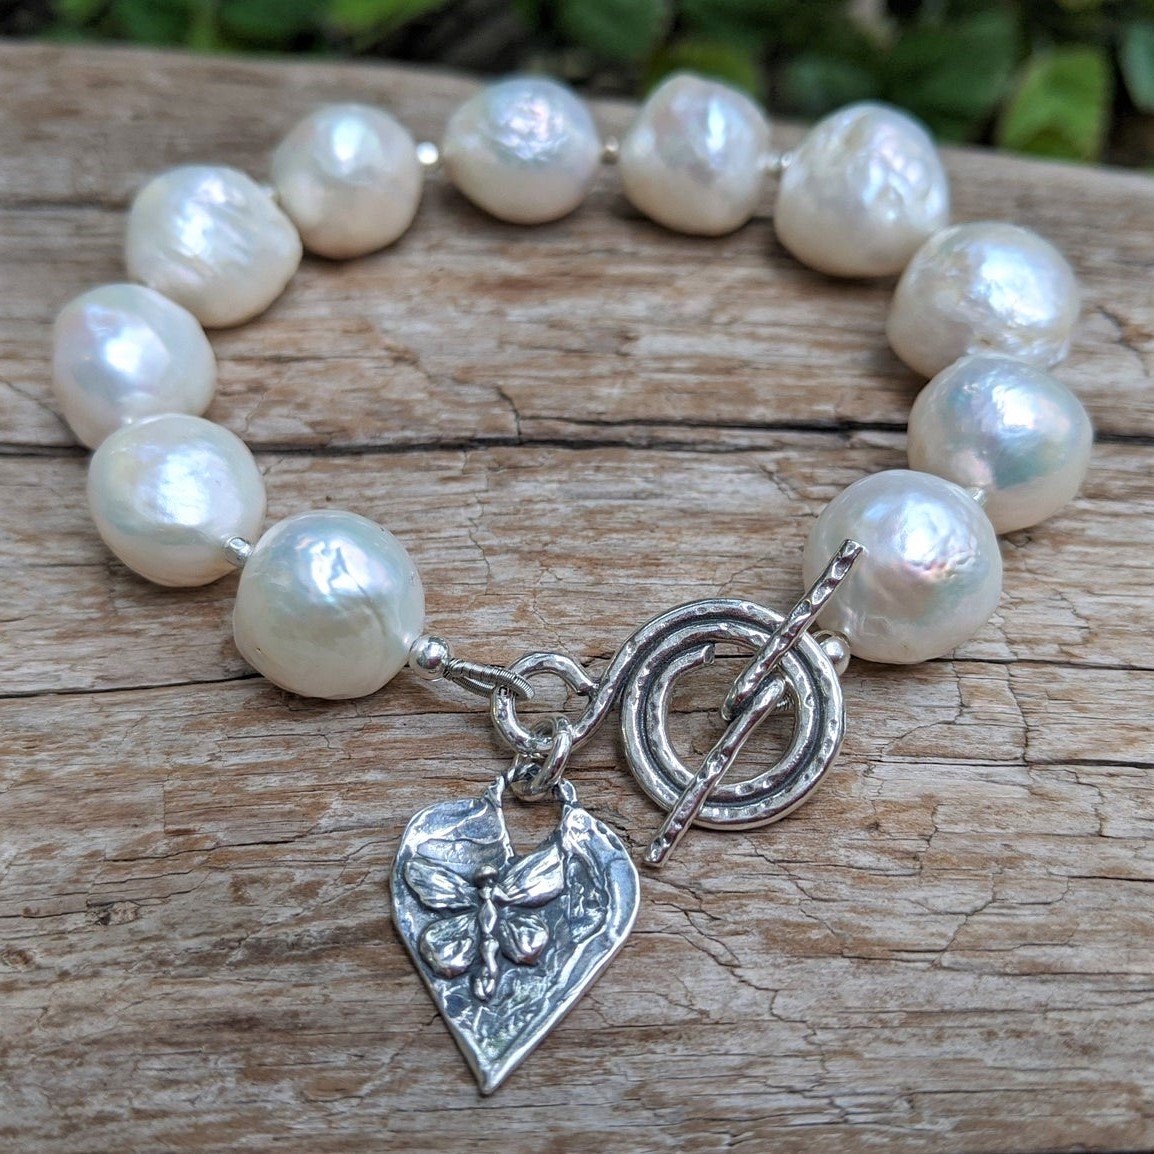 Freshwater pearl toggle bracelet in sterling silver.